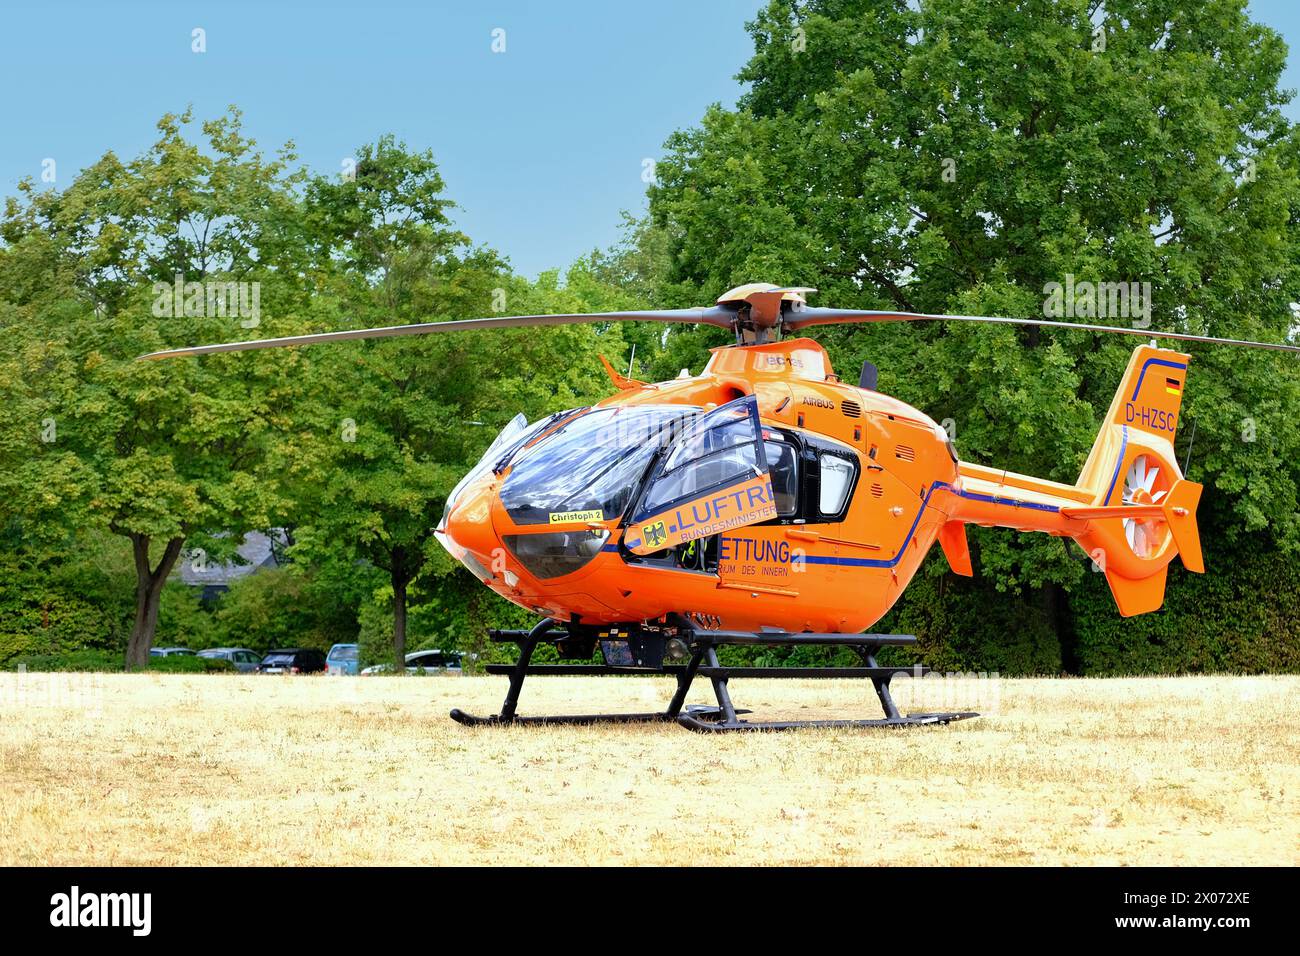 orange medical helicopter, Eurocopter before take-off, crew is preparing emergency aircraft, Air medical services, Rapid Response Vehicles, intensive Stock Photo